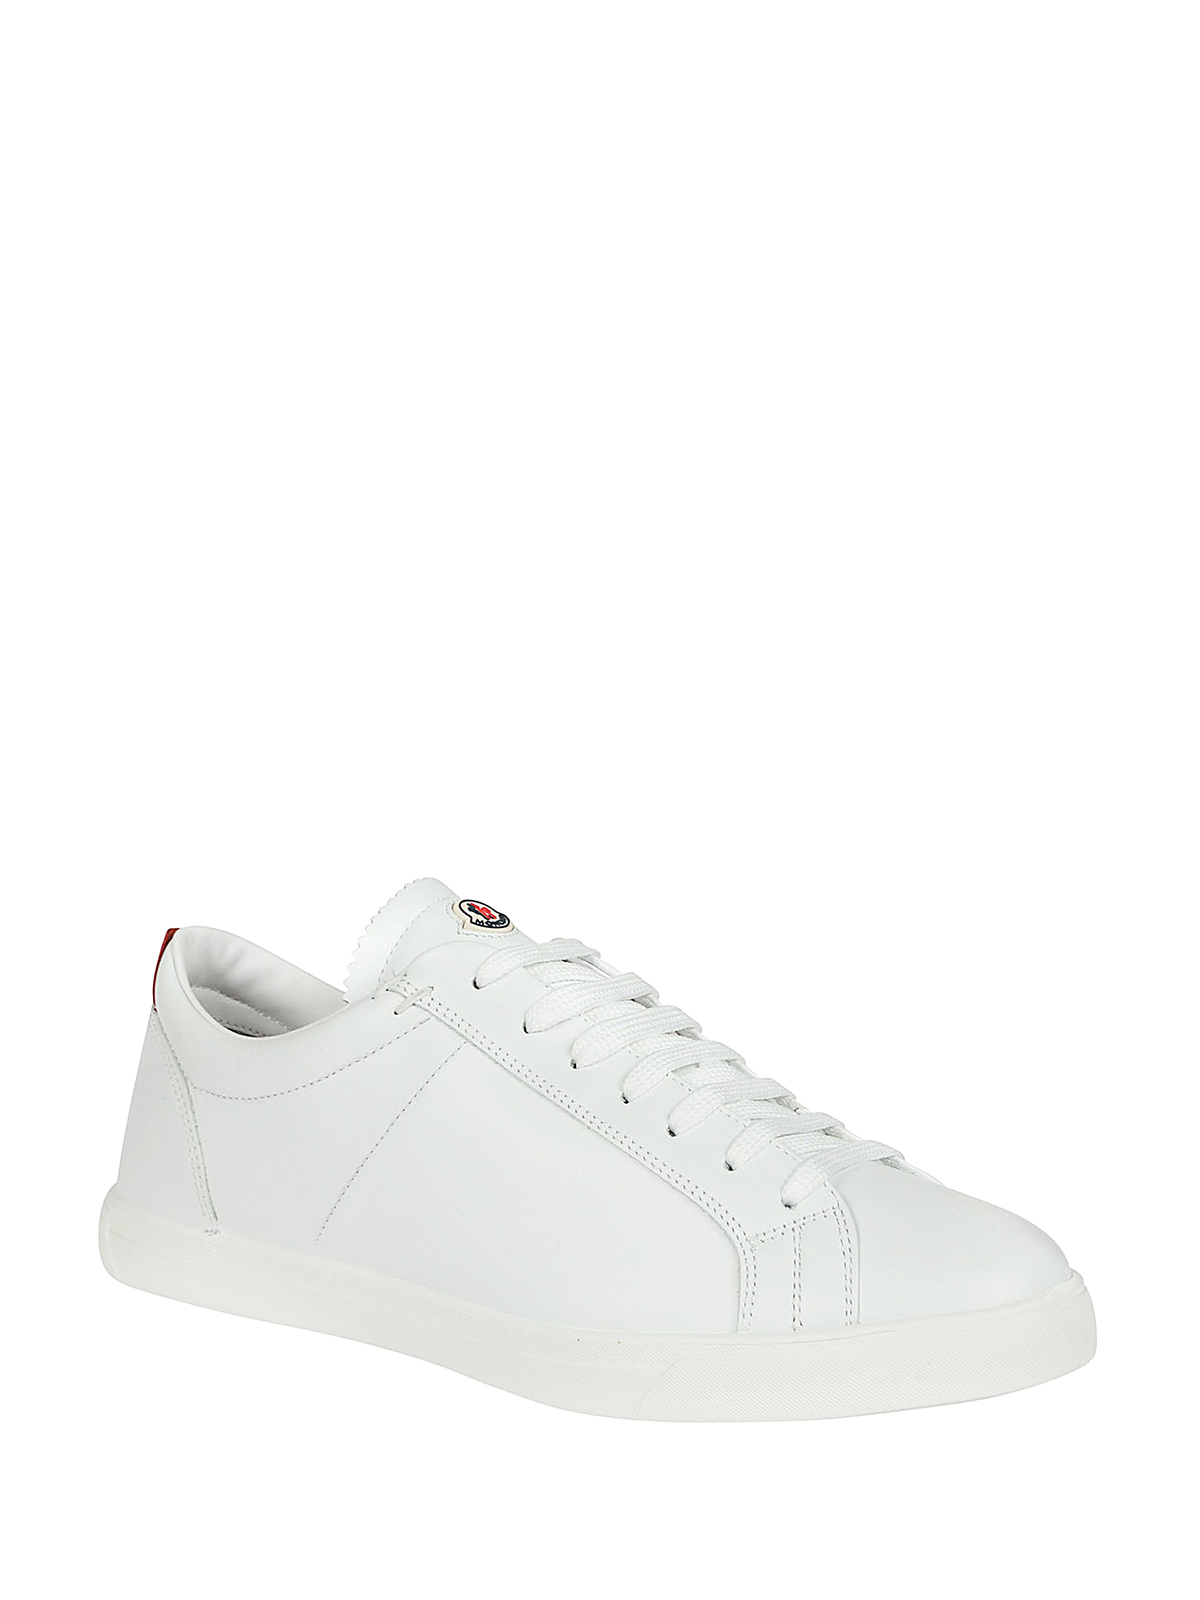 Trainers Moncler - White leather sneakers - 1017400019MT001 | iKRIX.com